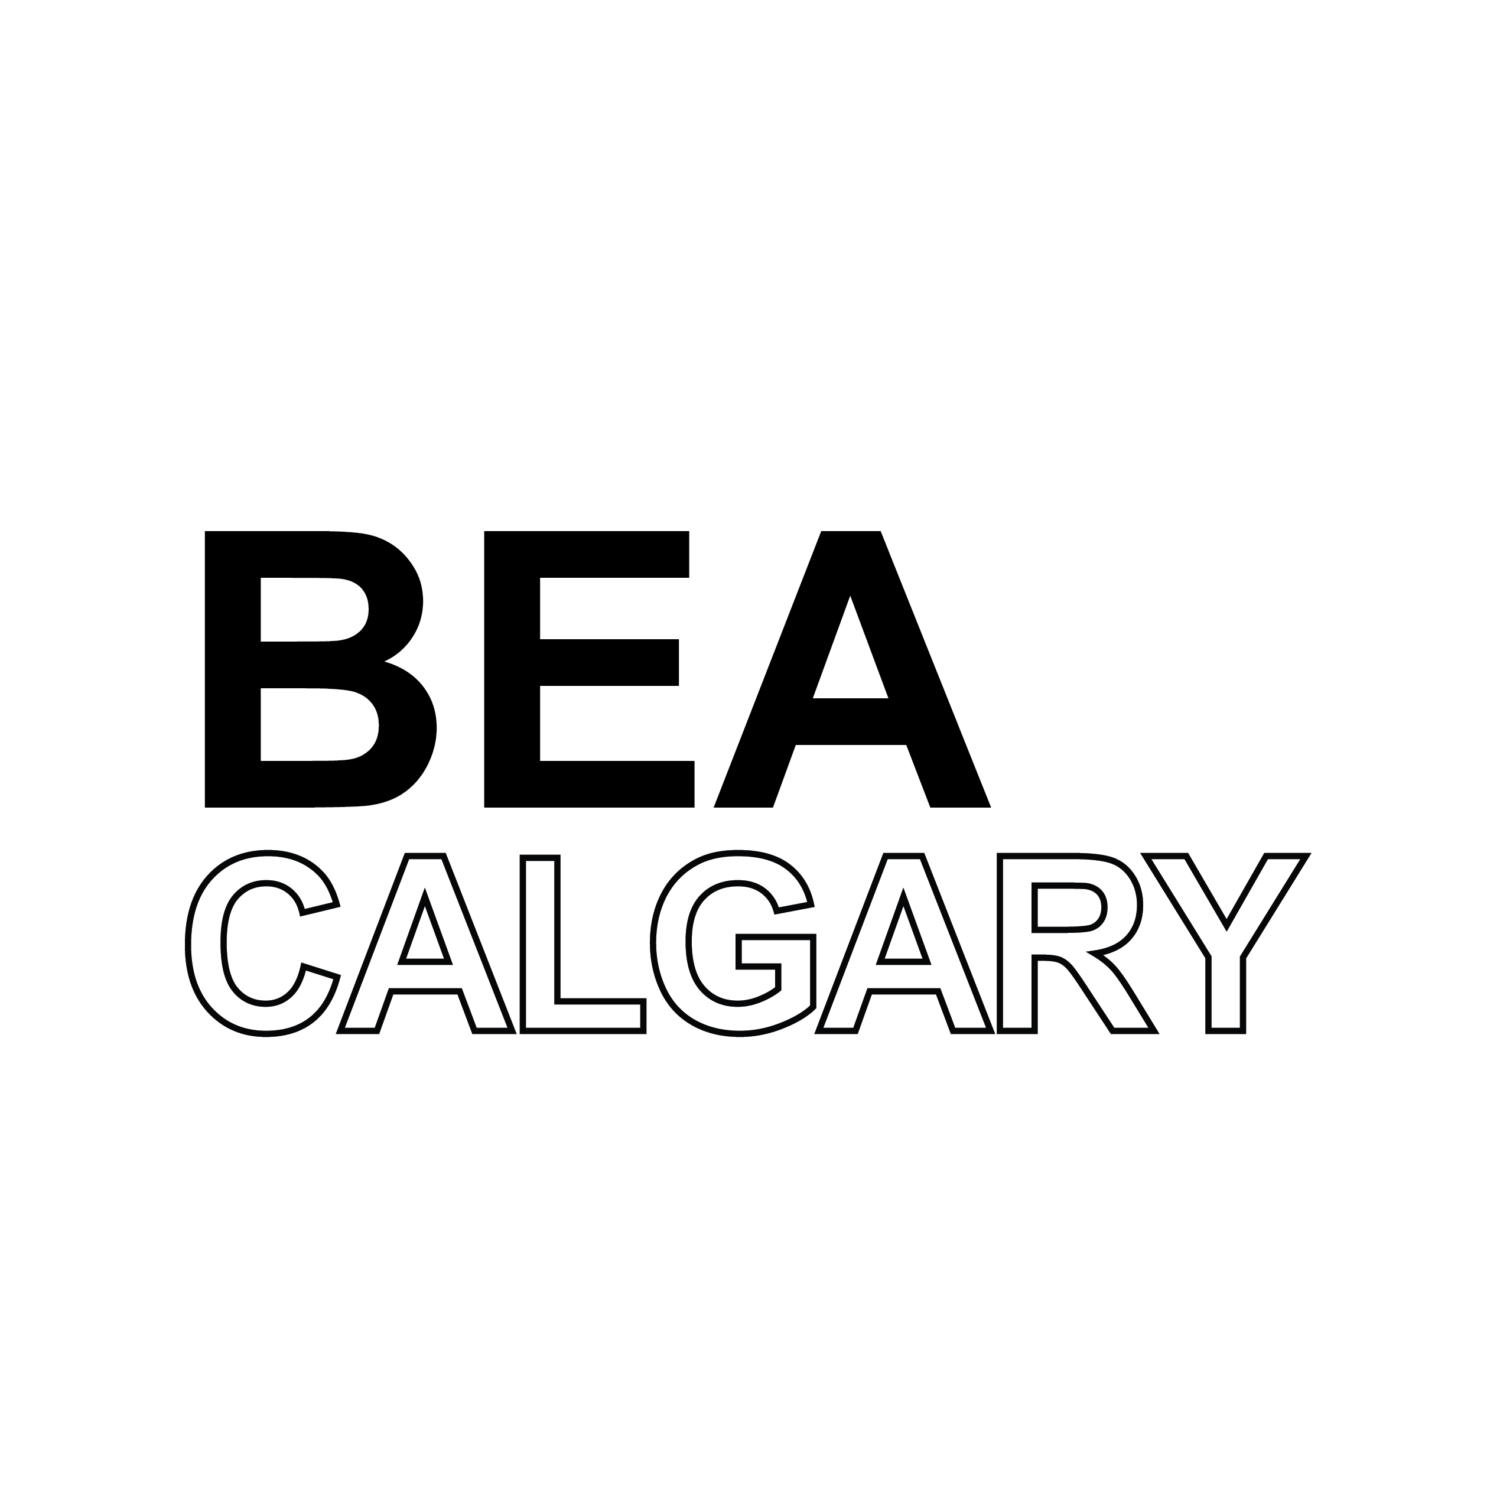 Building Equality in Architecture Calgary